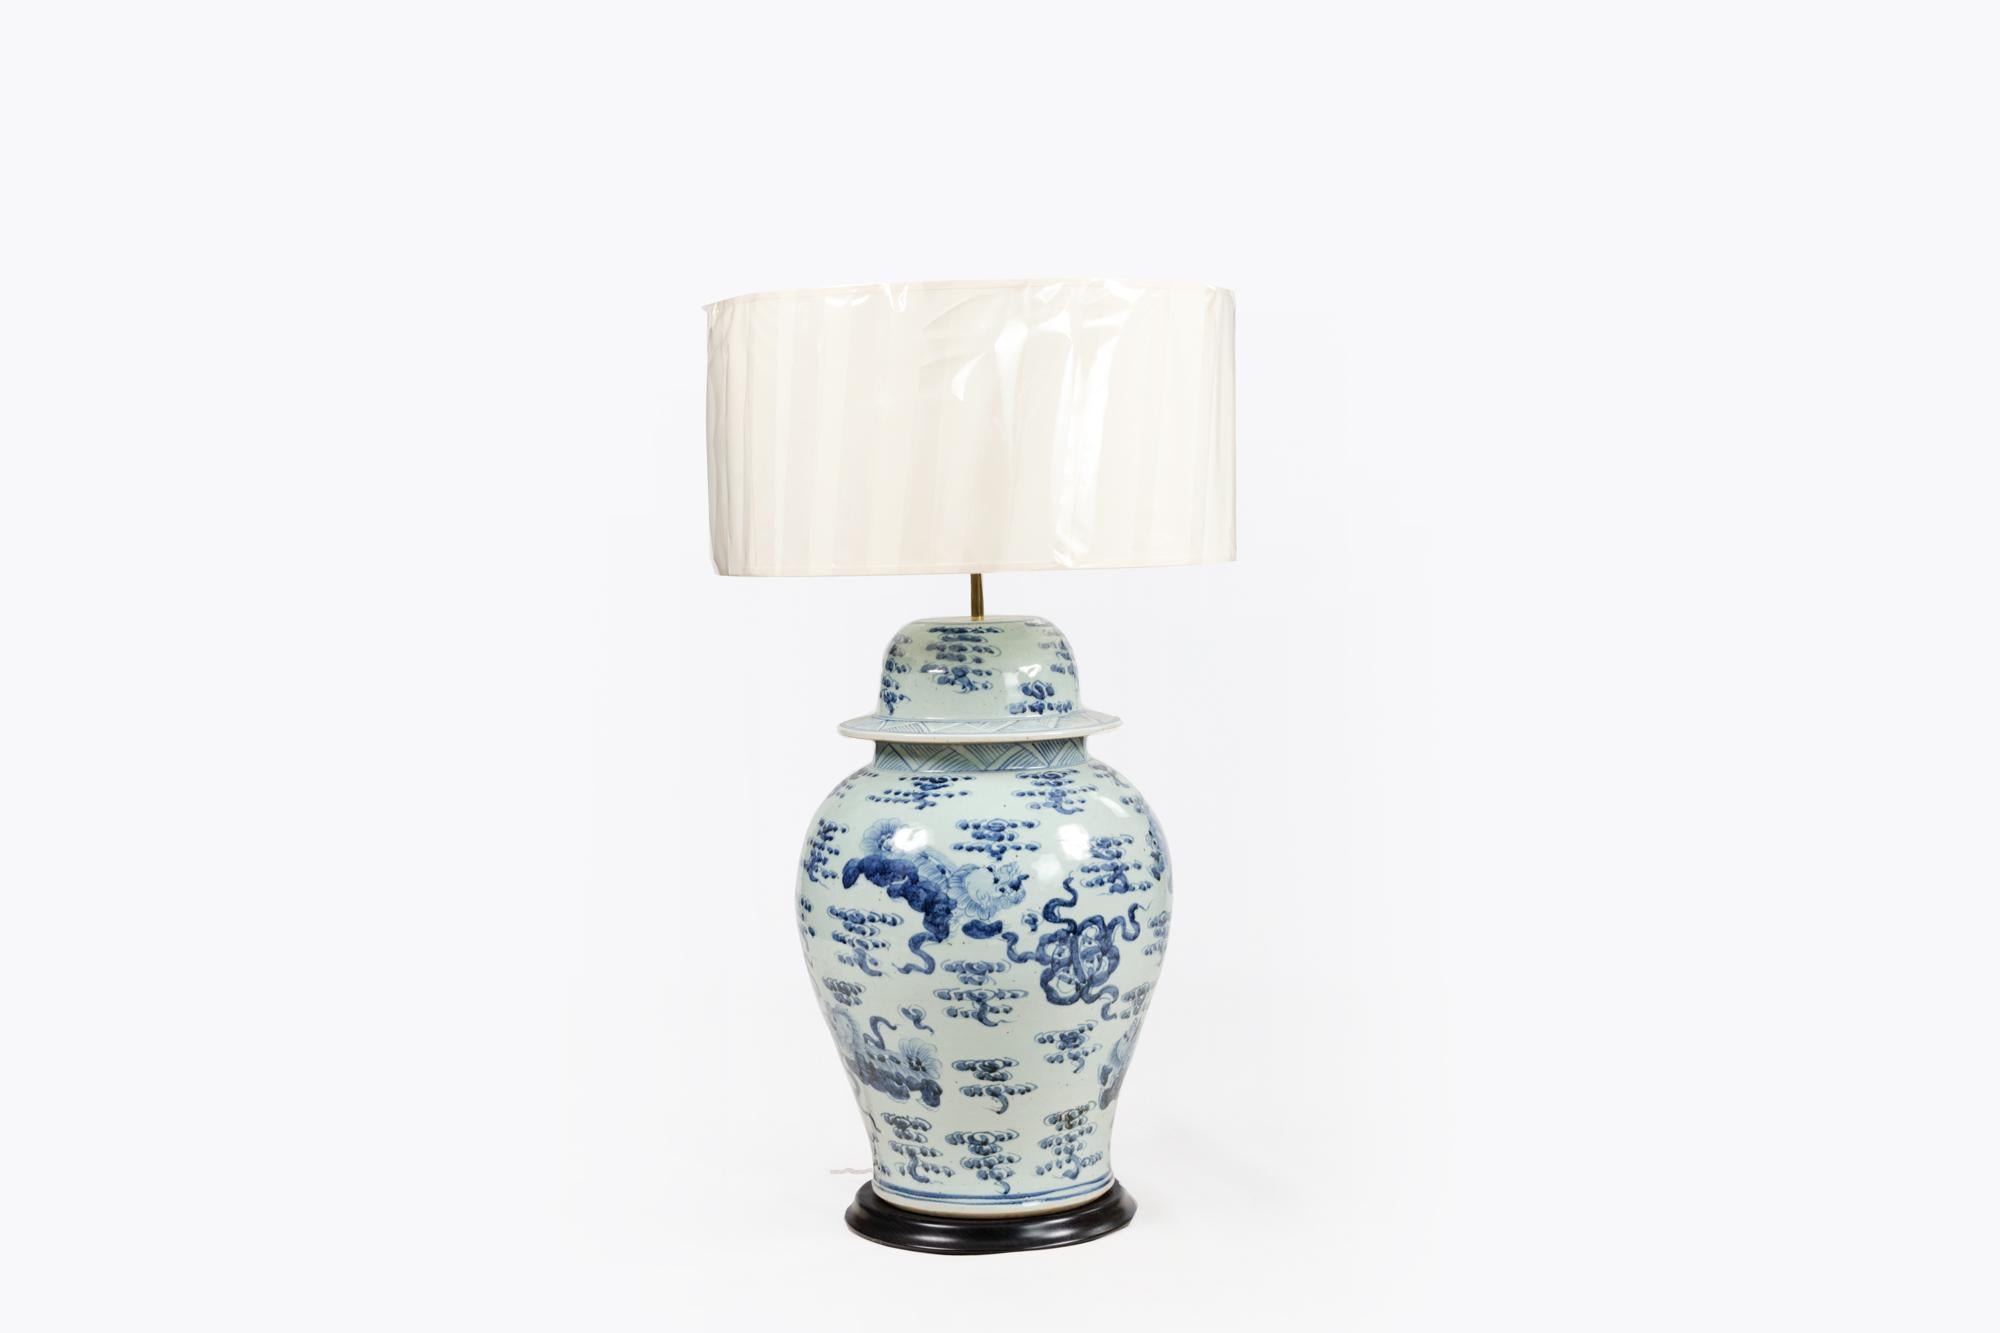 A large pair of early 20th century blue and white ginger jars converted into lamps in the style of the Chinese period of the 18th Century.